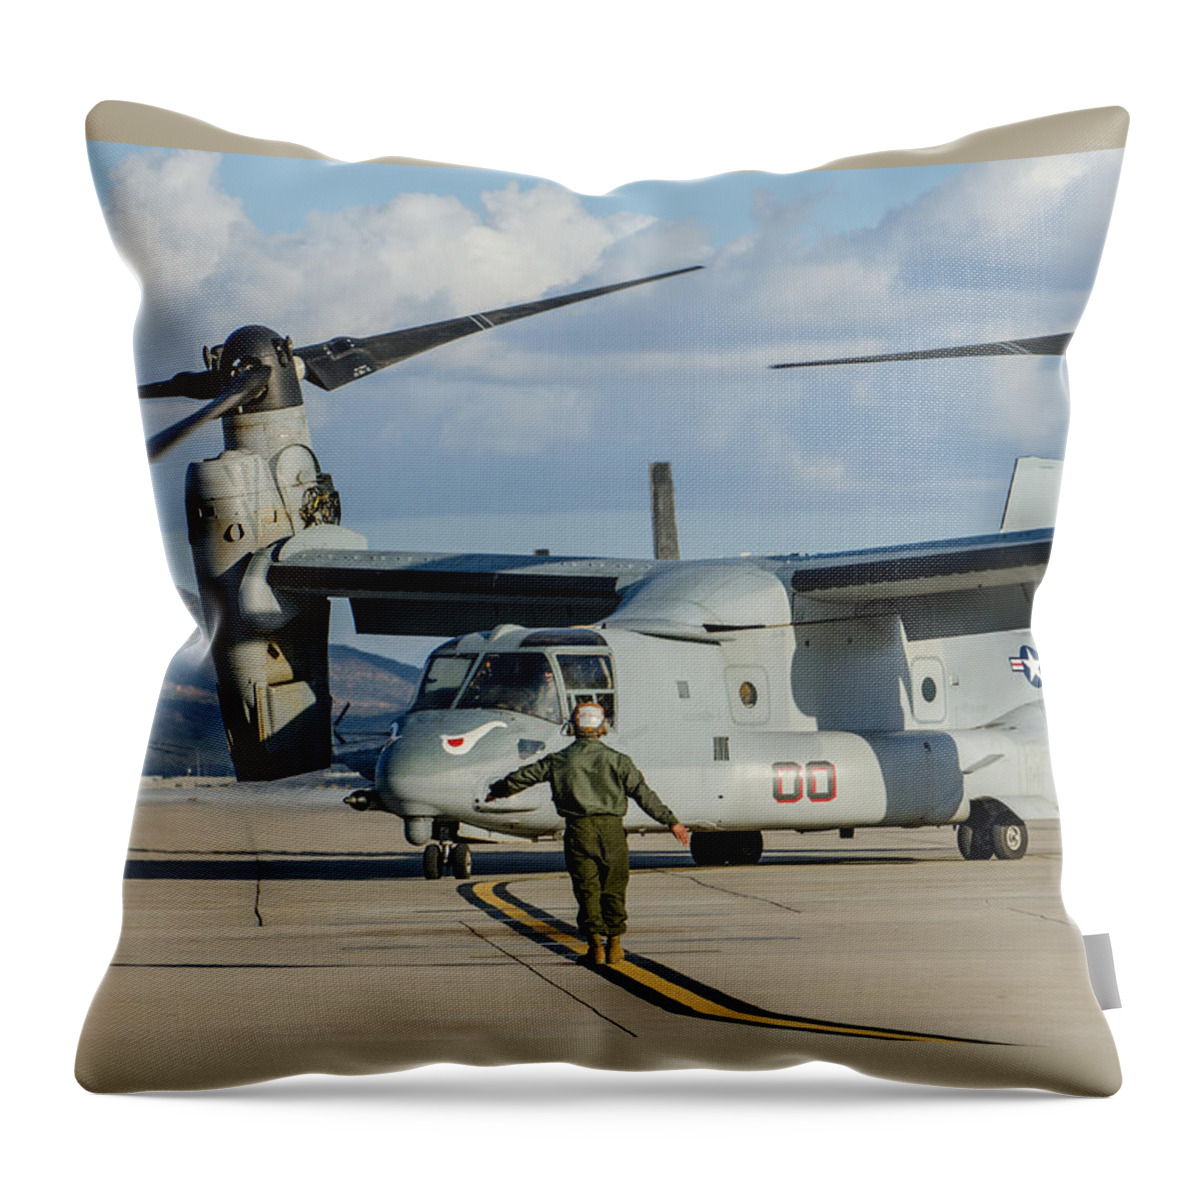 On The Mark Throw Pillow featuring the photograph On The Mark by Susan McMenamin